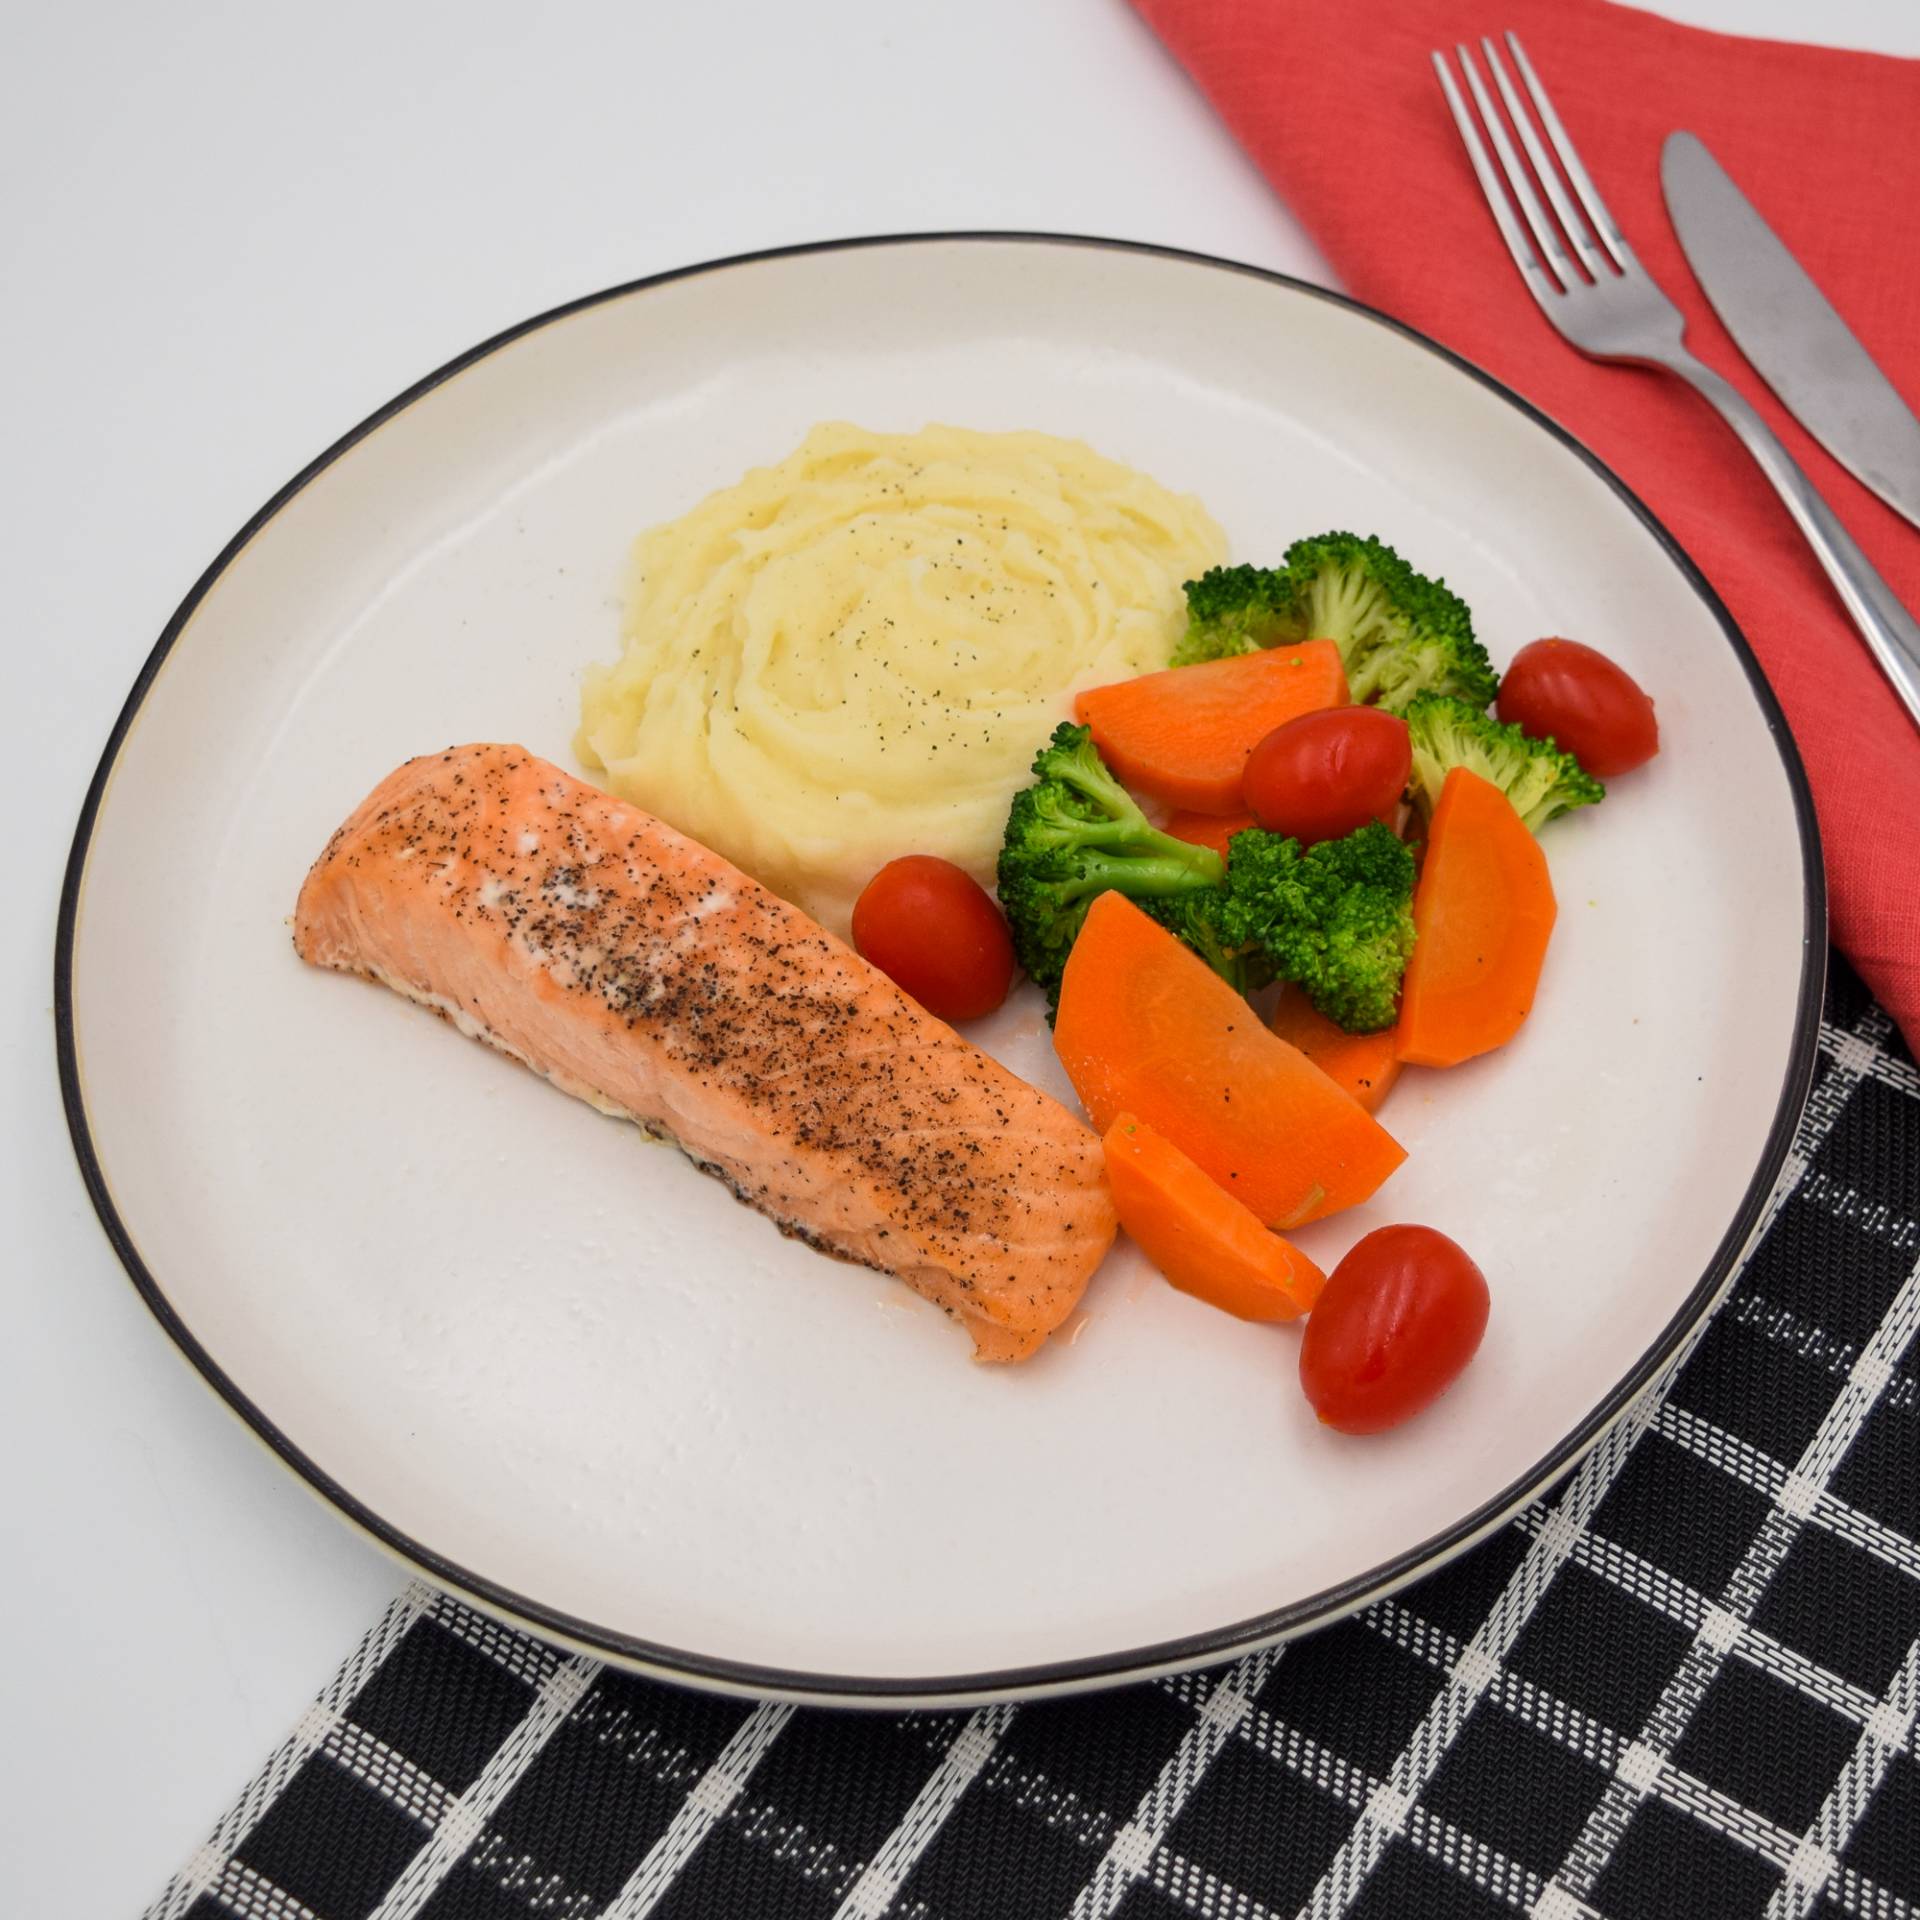 Baked salmon with mashed potatoes and steamed vegetables